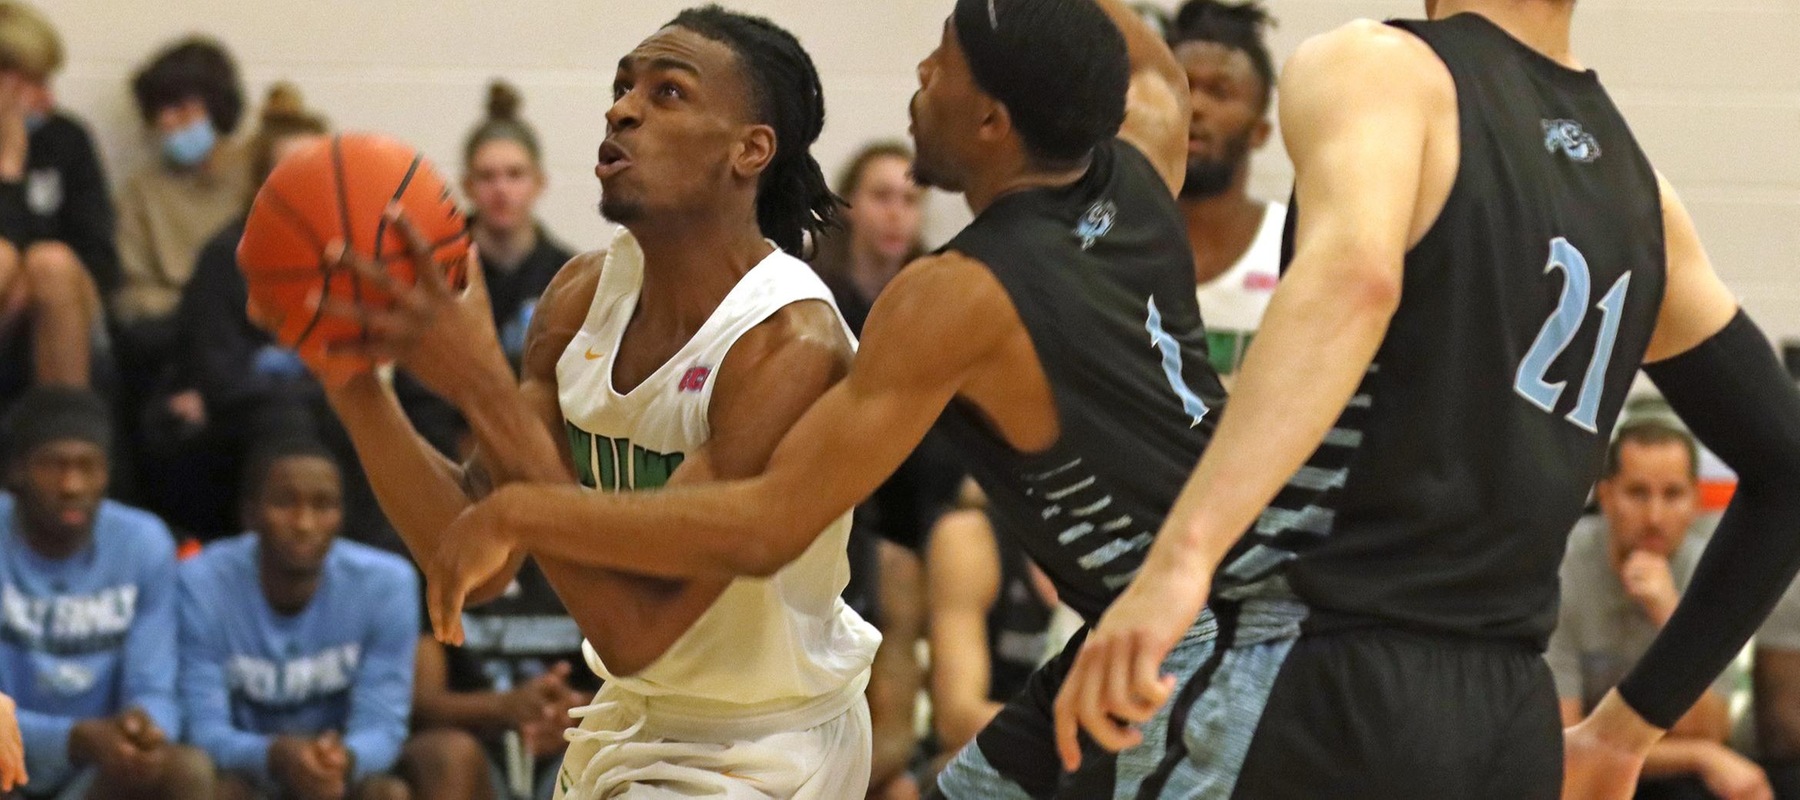 File photo of Justin Thomas who scored 23 points at USciences. Copyright 2021; Wilmington University. All rights reserved. Photo by Trudy Spence. December 4, 2021 vs. Holy Family.